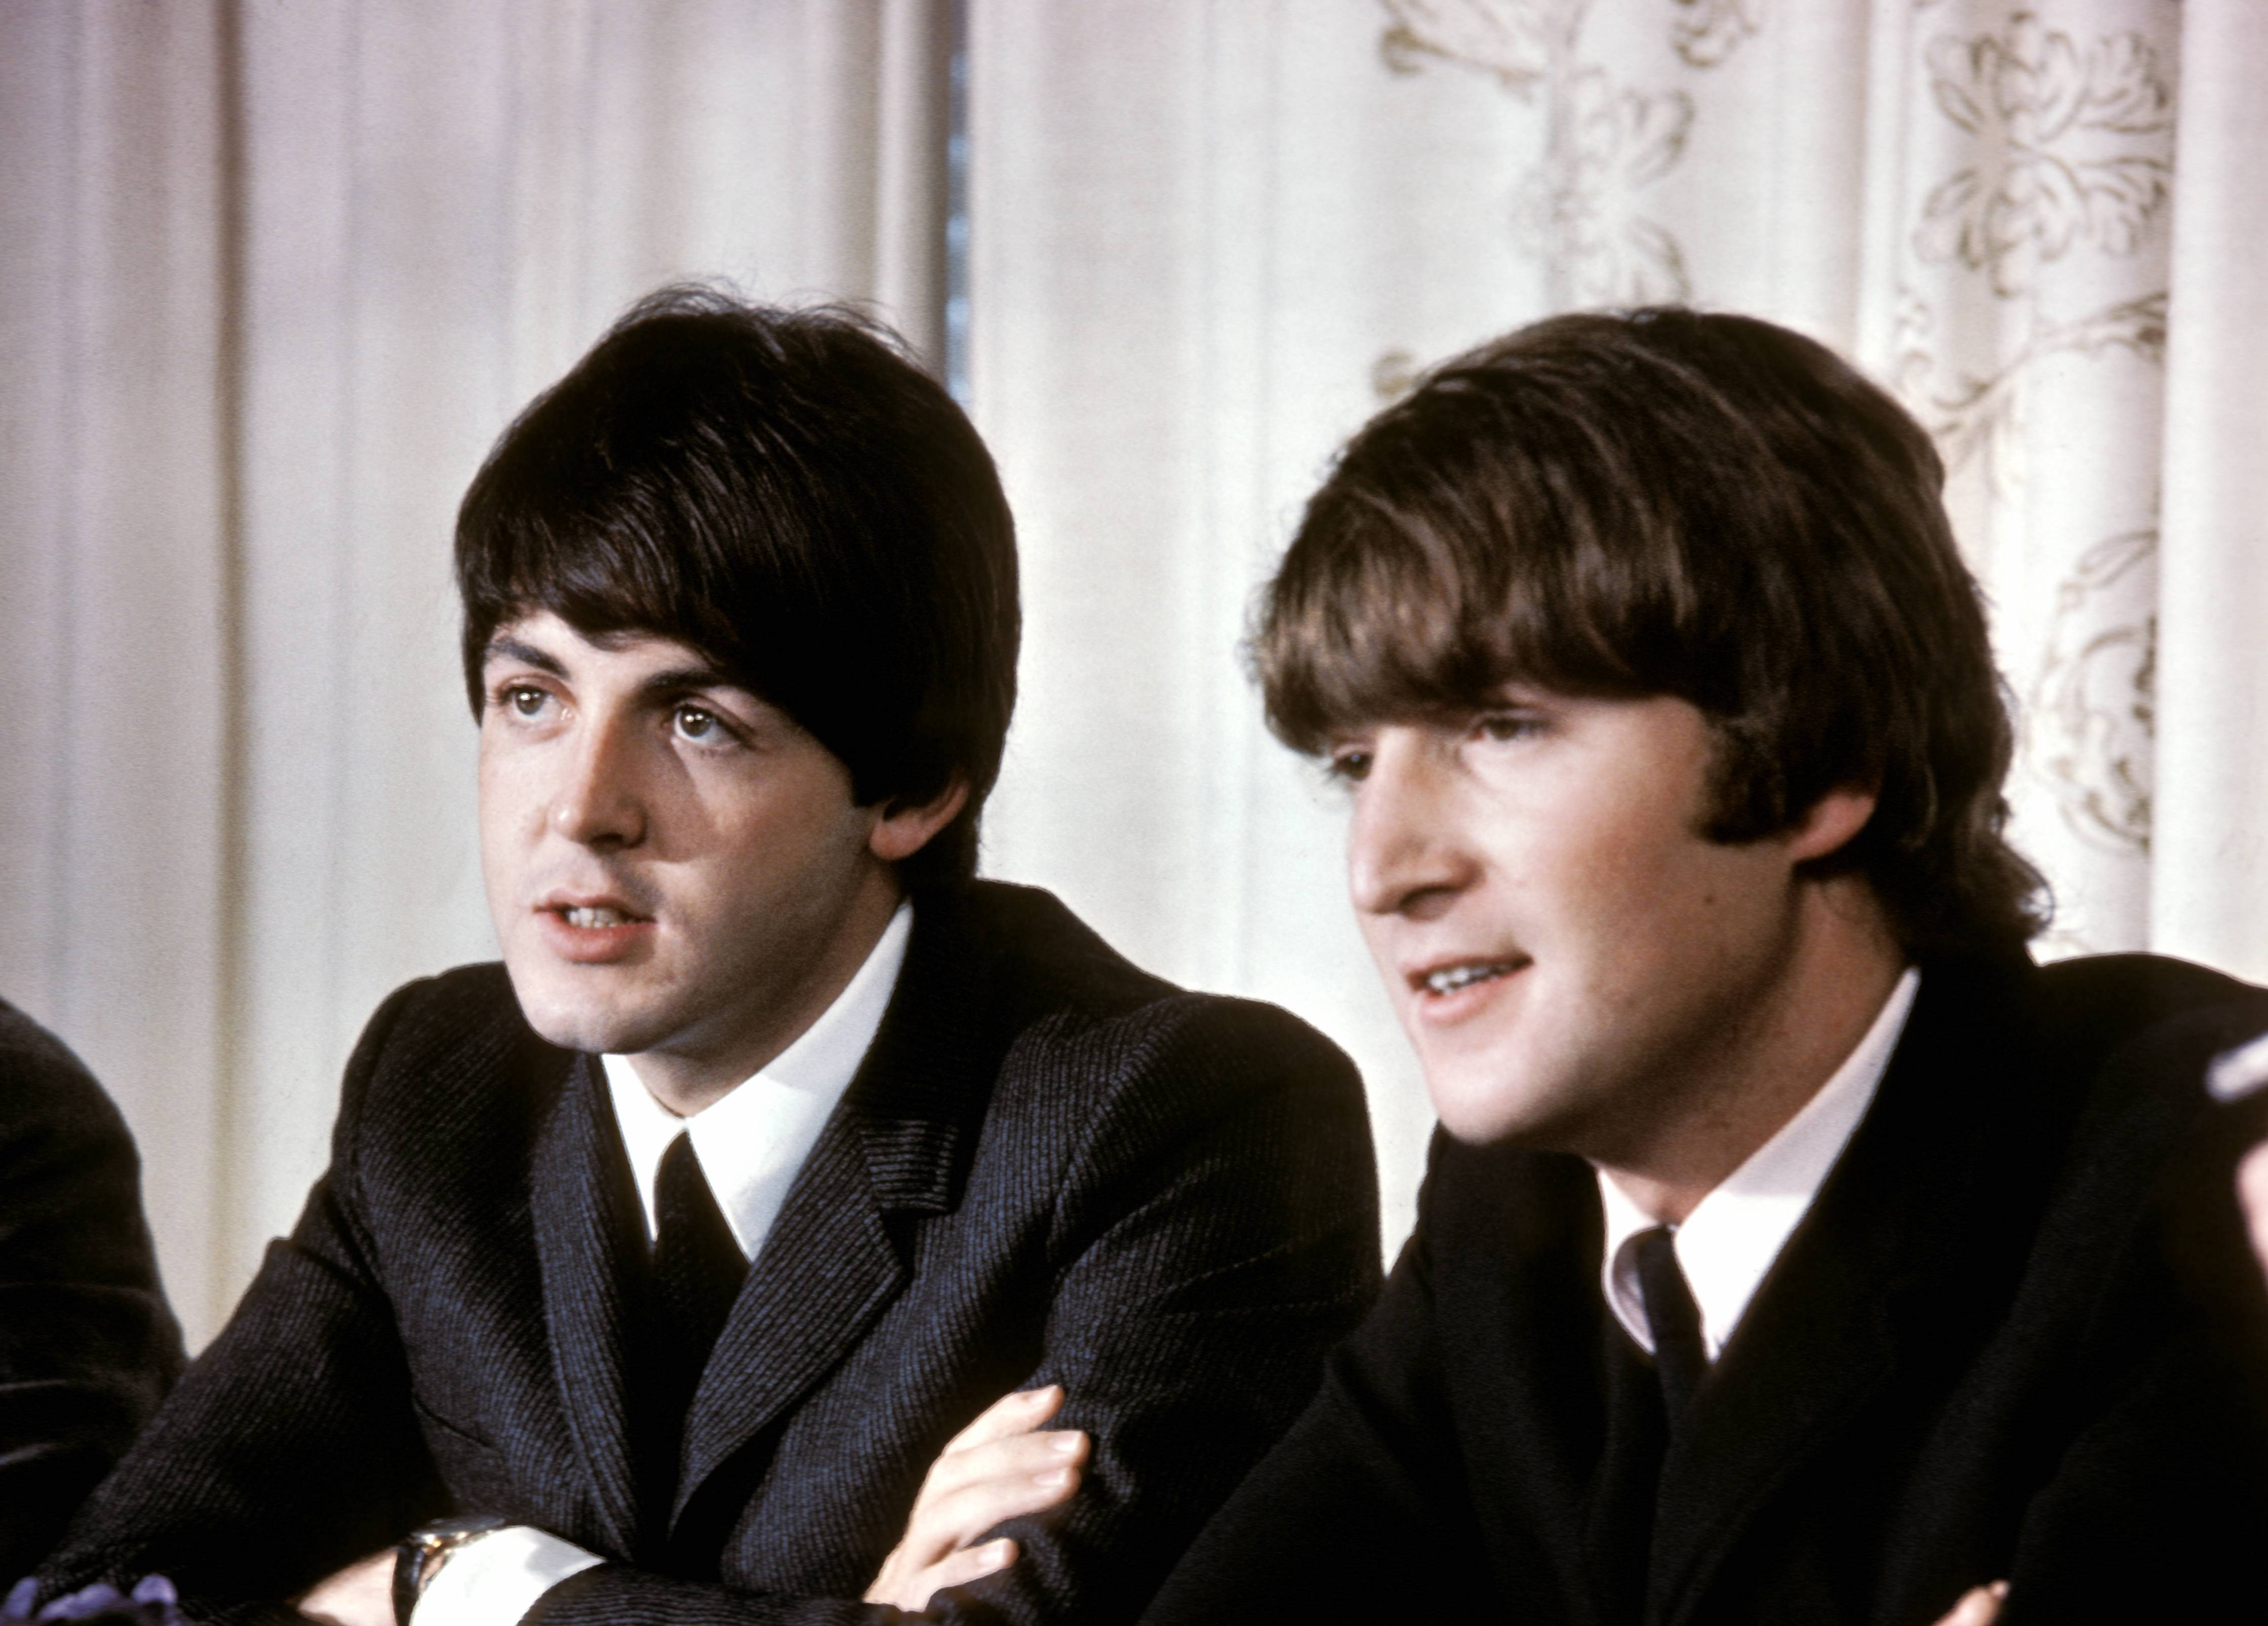 Paul McCartney and John Lennon at a press conference